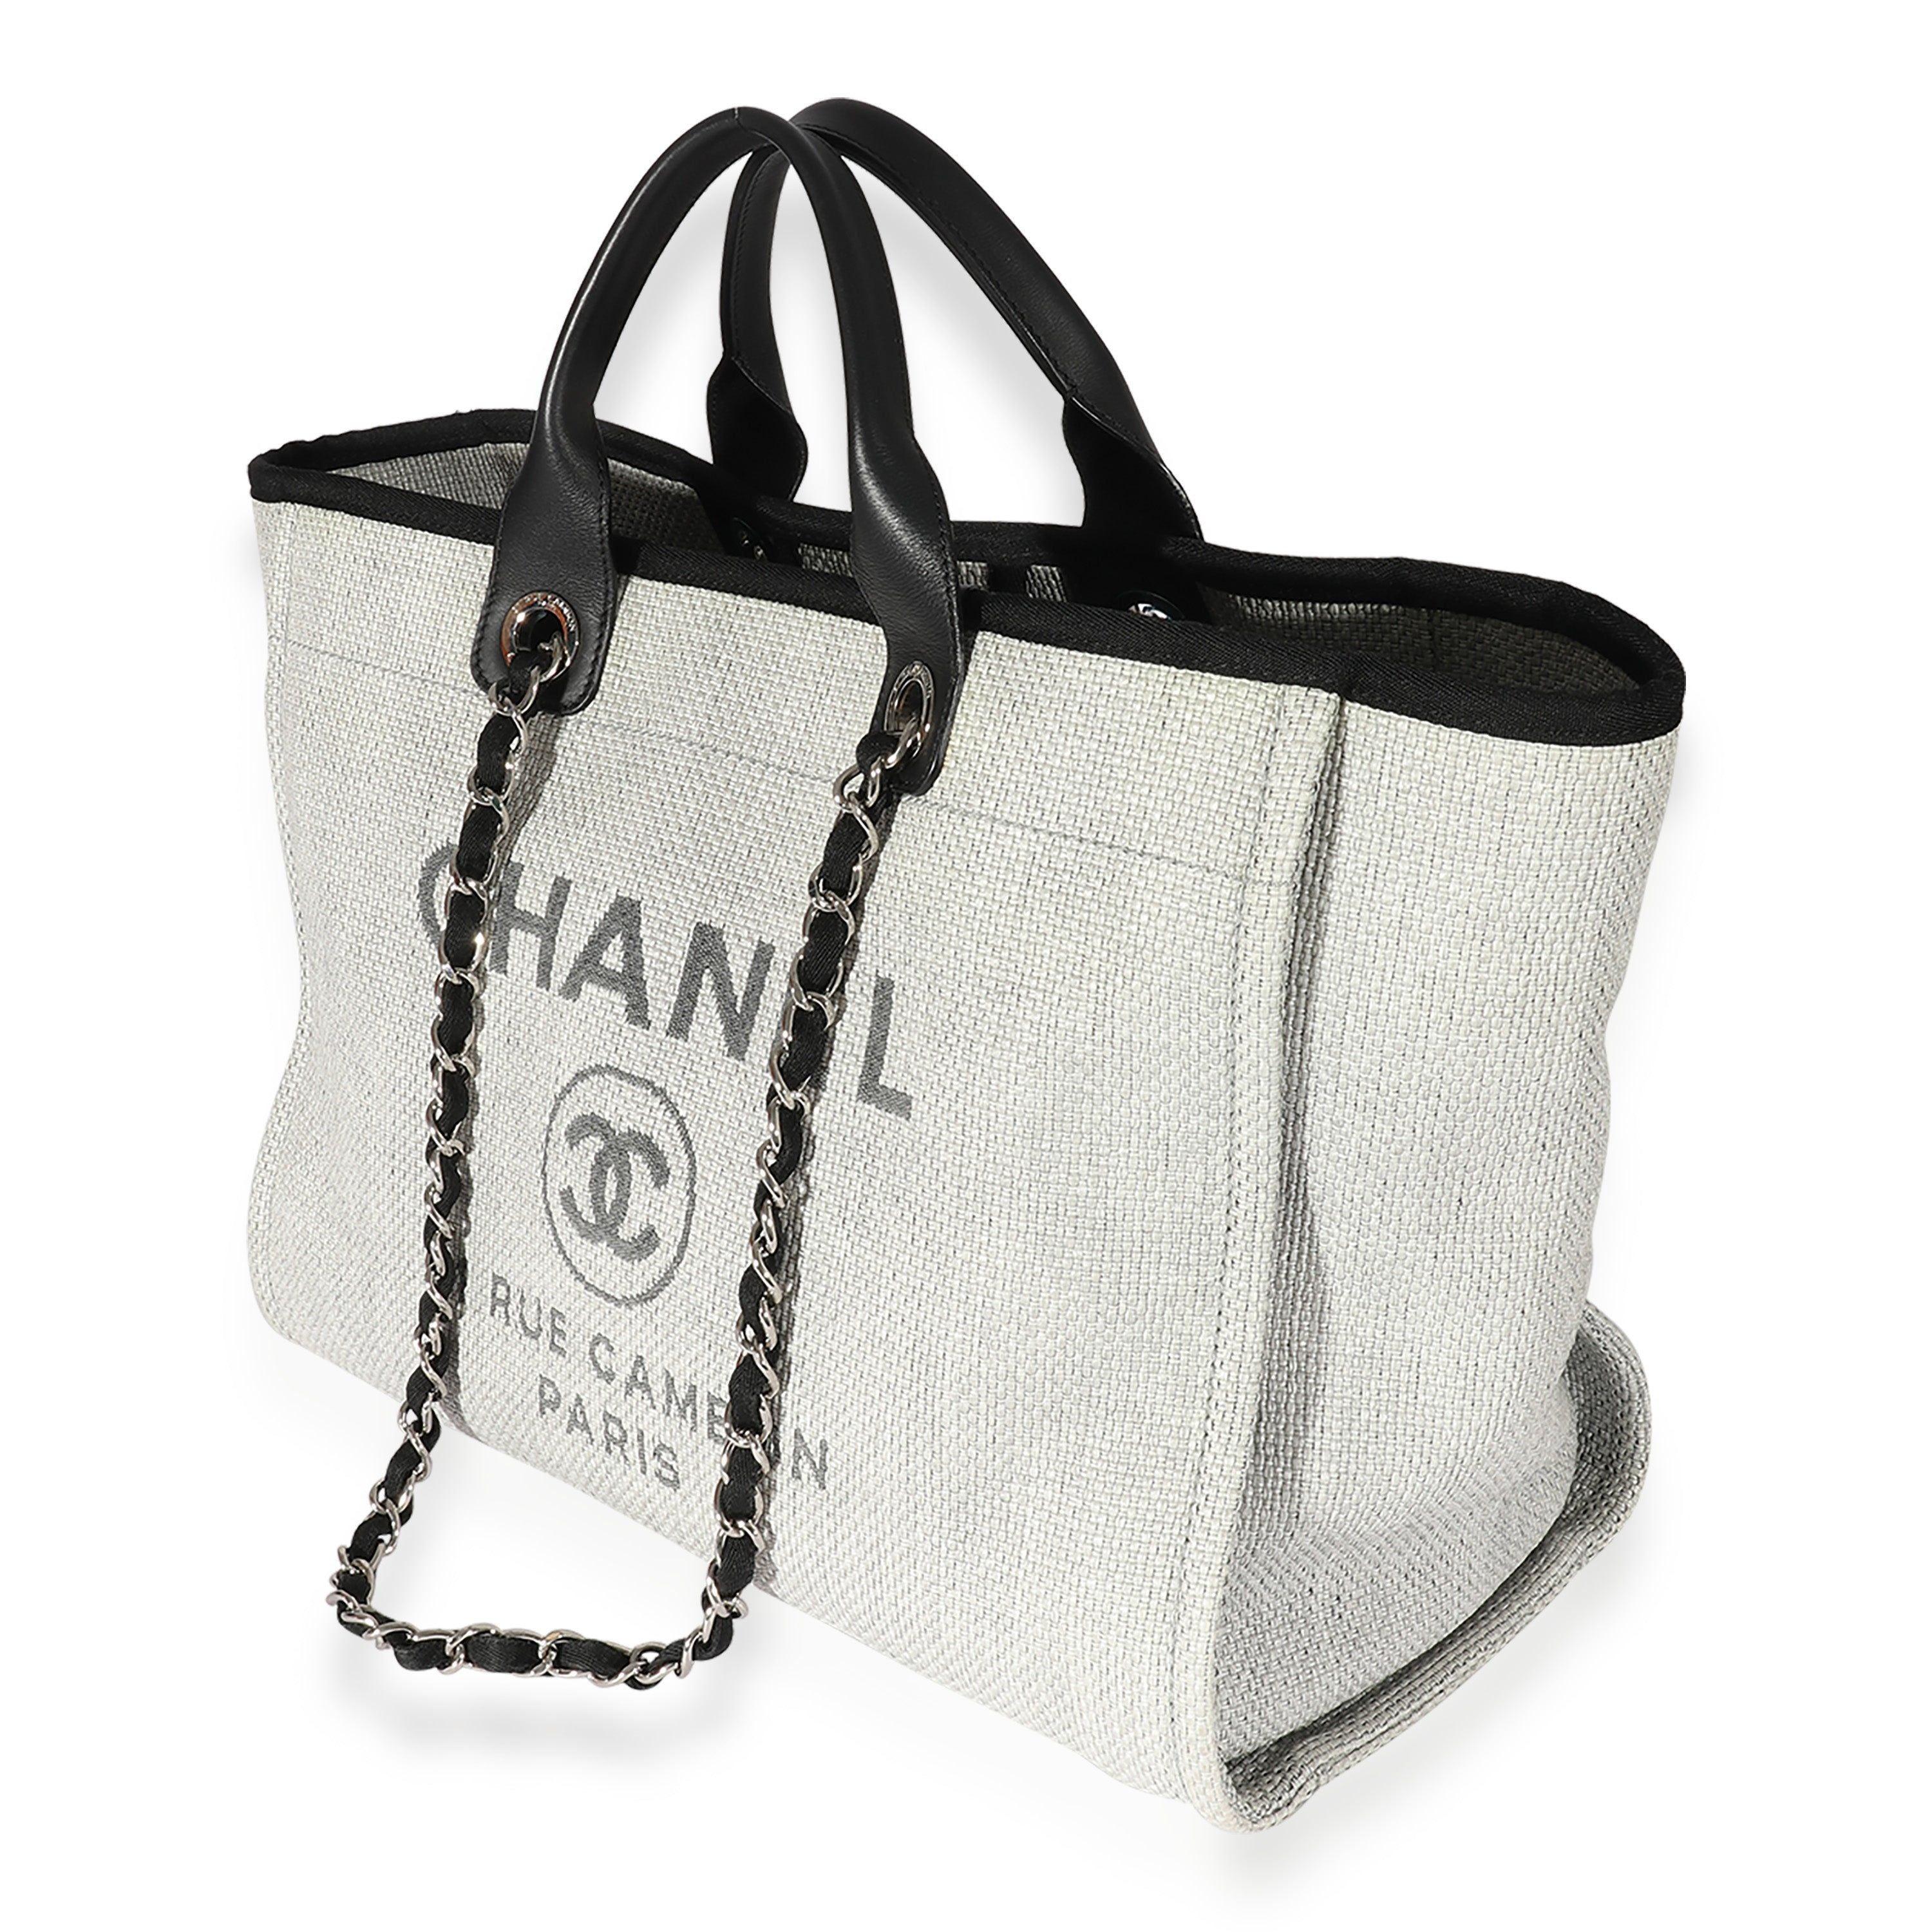 Chanel Grey & Black Canvas Large Deauville Tote in Metallic